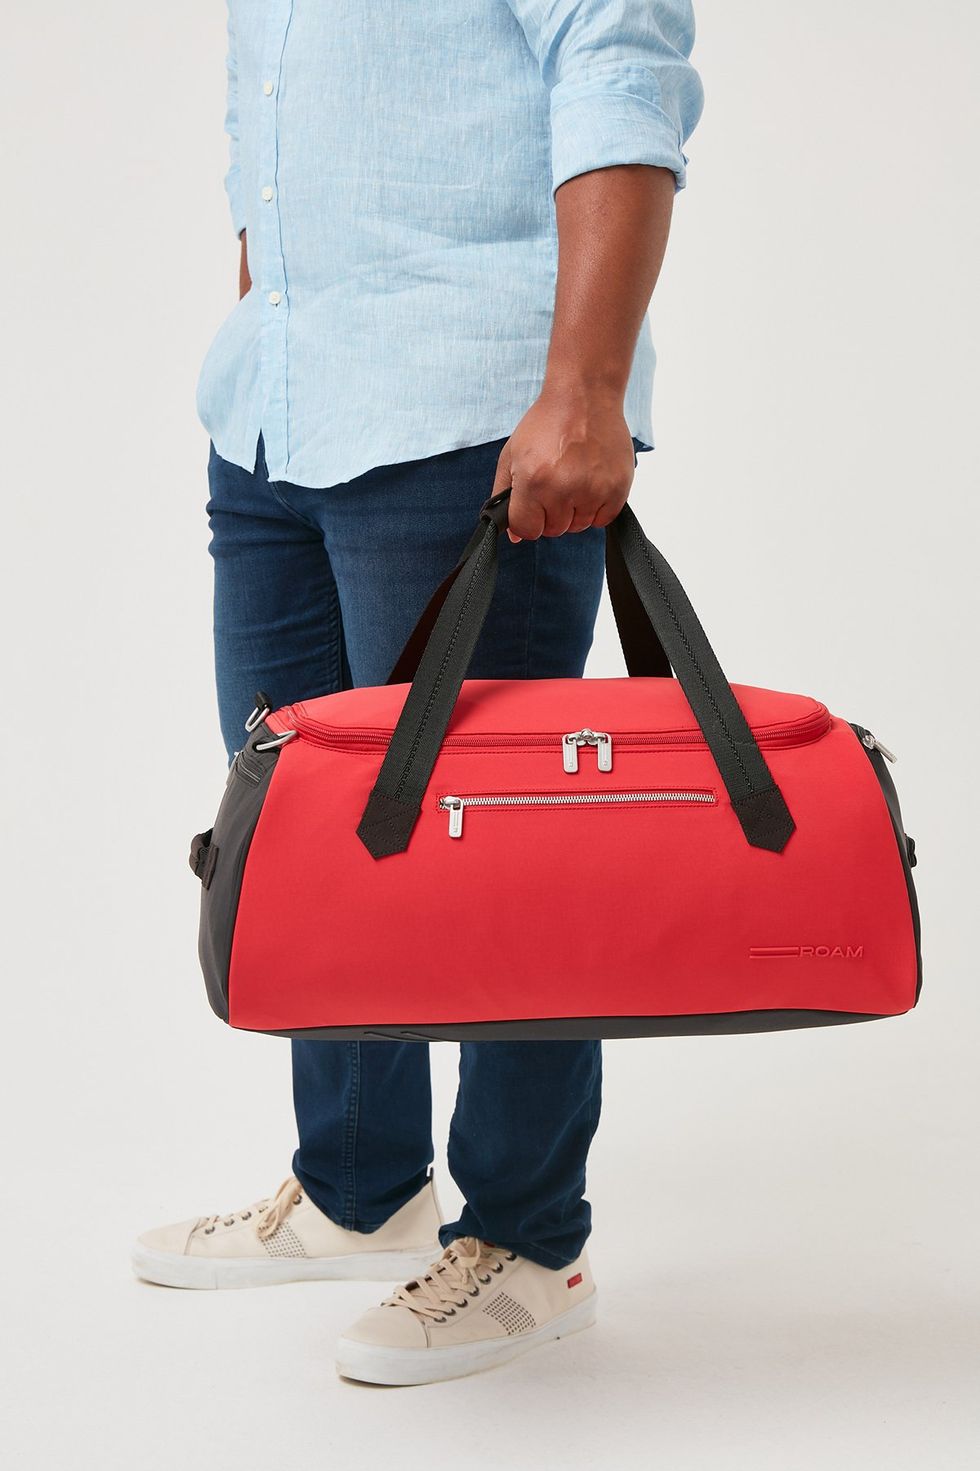 Why You Need These 5 Roam Luggage Bags and Accessories: Medium Duffel Bag